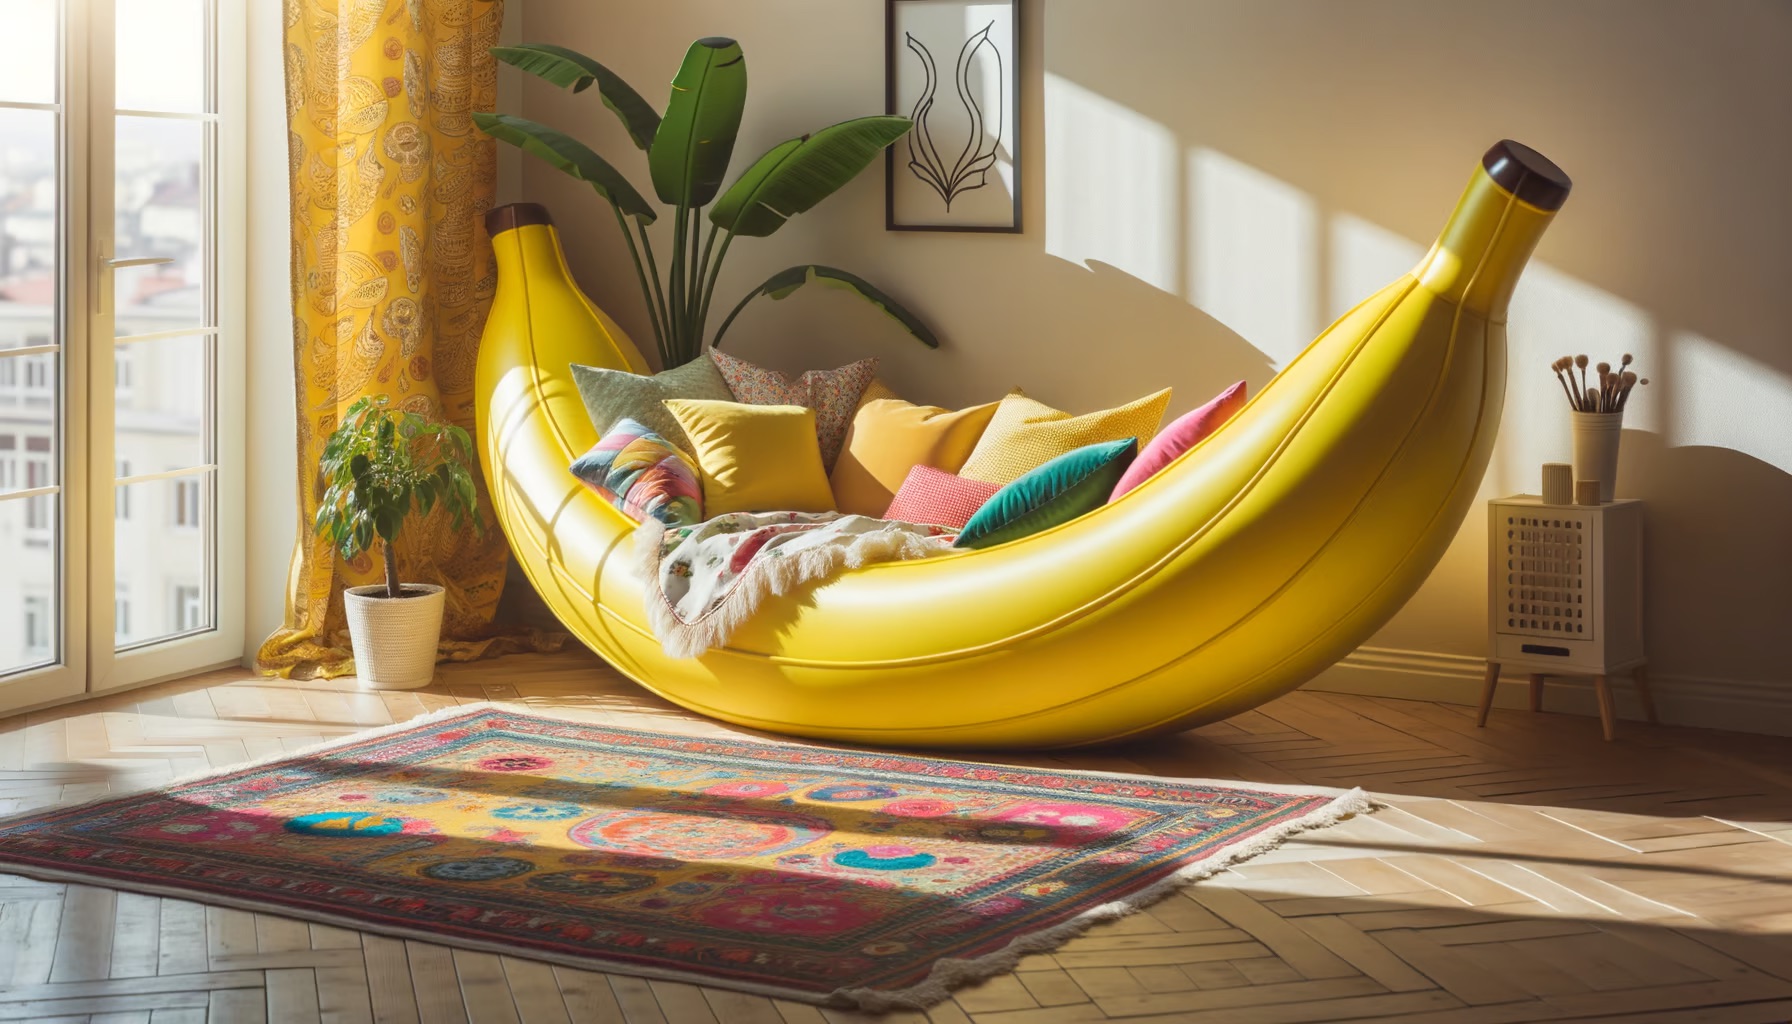 Dall-e 3: A vibrant yellow banana-shaped couch sits in a cozy living room, its curve cradling a pile of colorful cushions. On the wooden floor, a patterned rug adds a touch of eclectic charm, and a potted plant sits in the corner, reaching towards the sunlight filtering through the window.